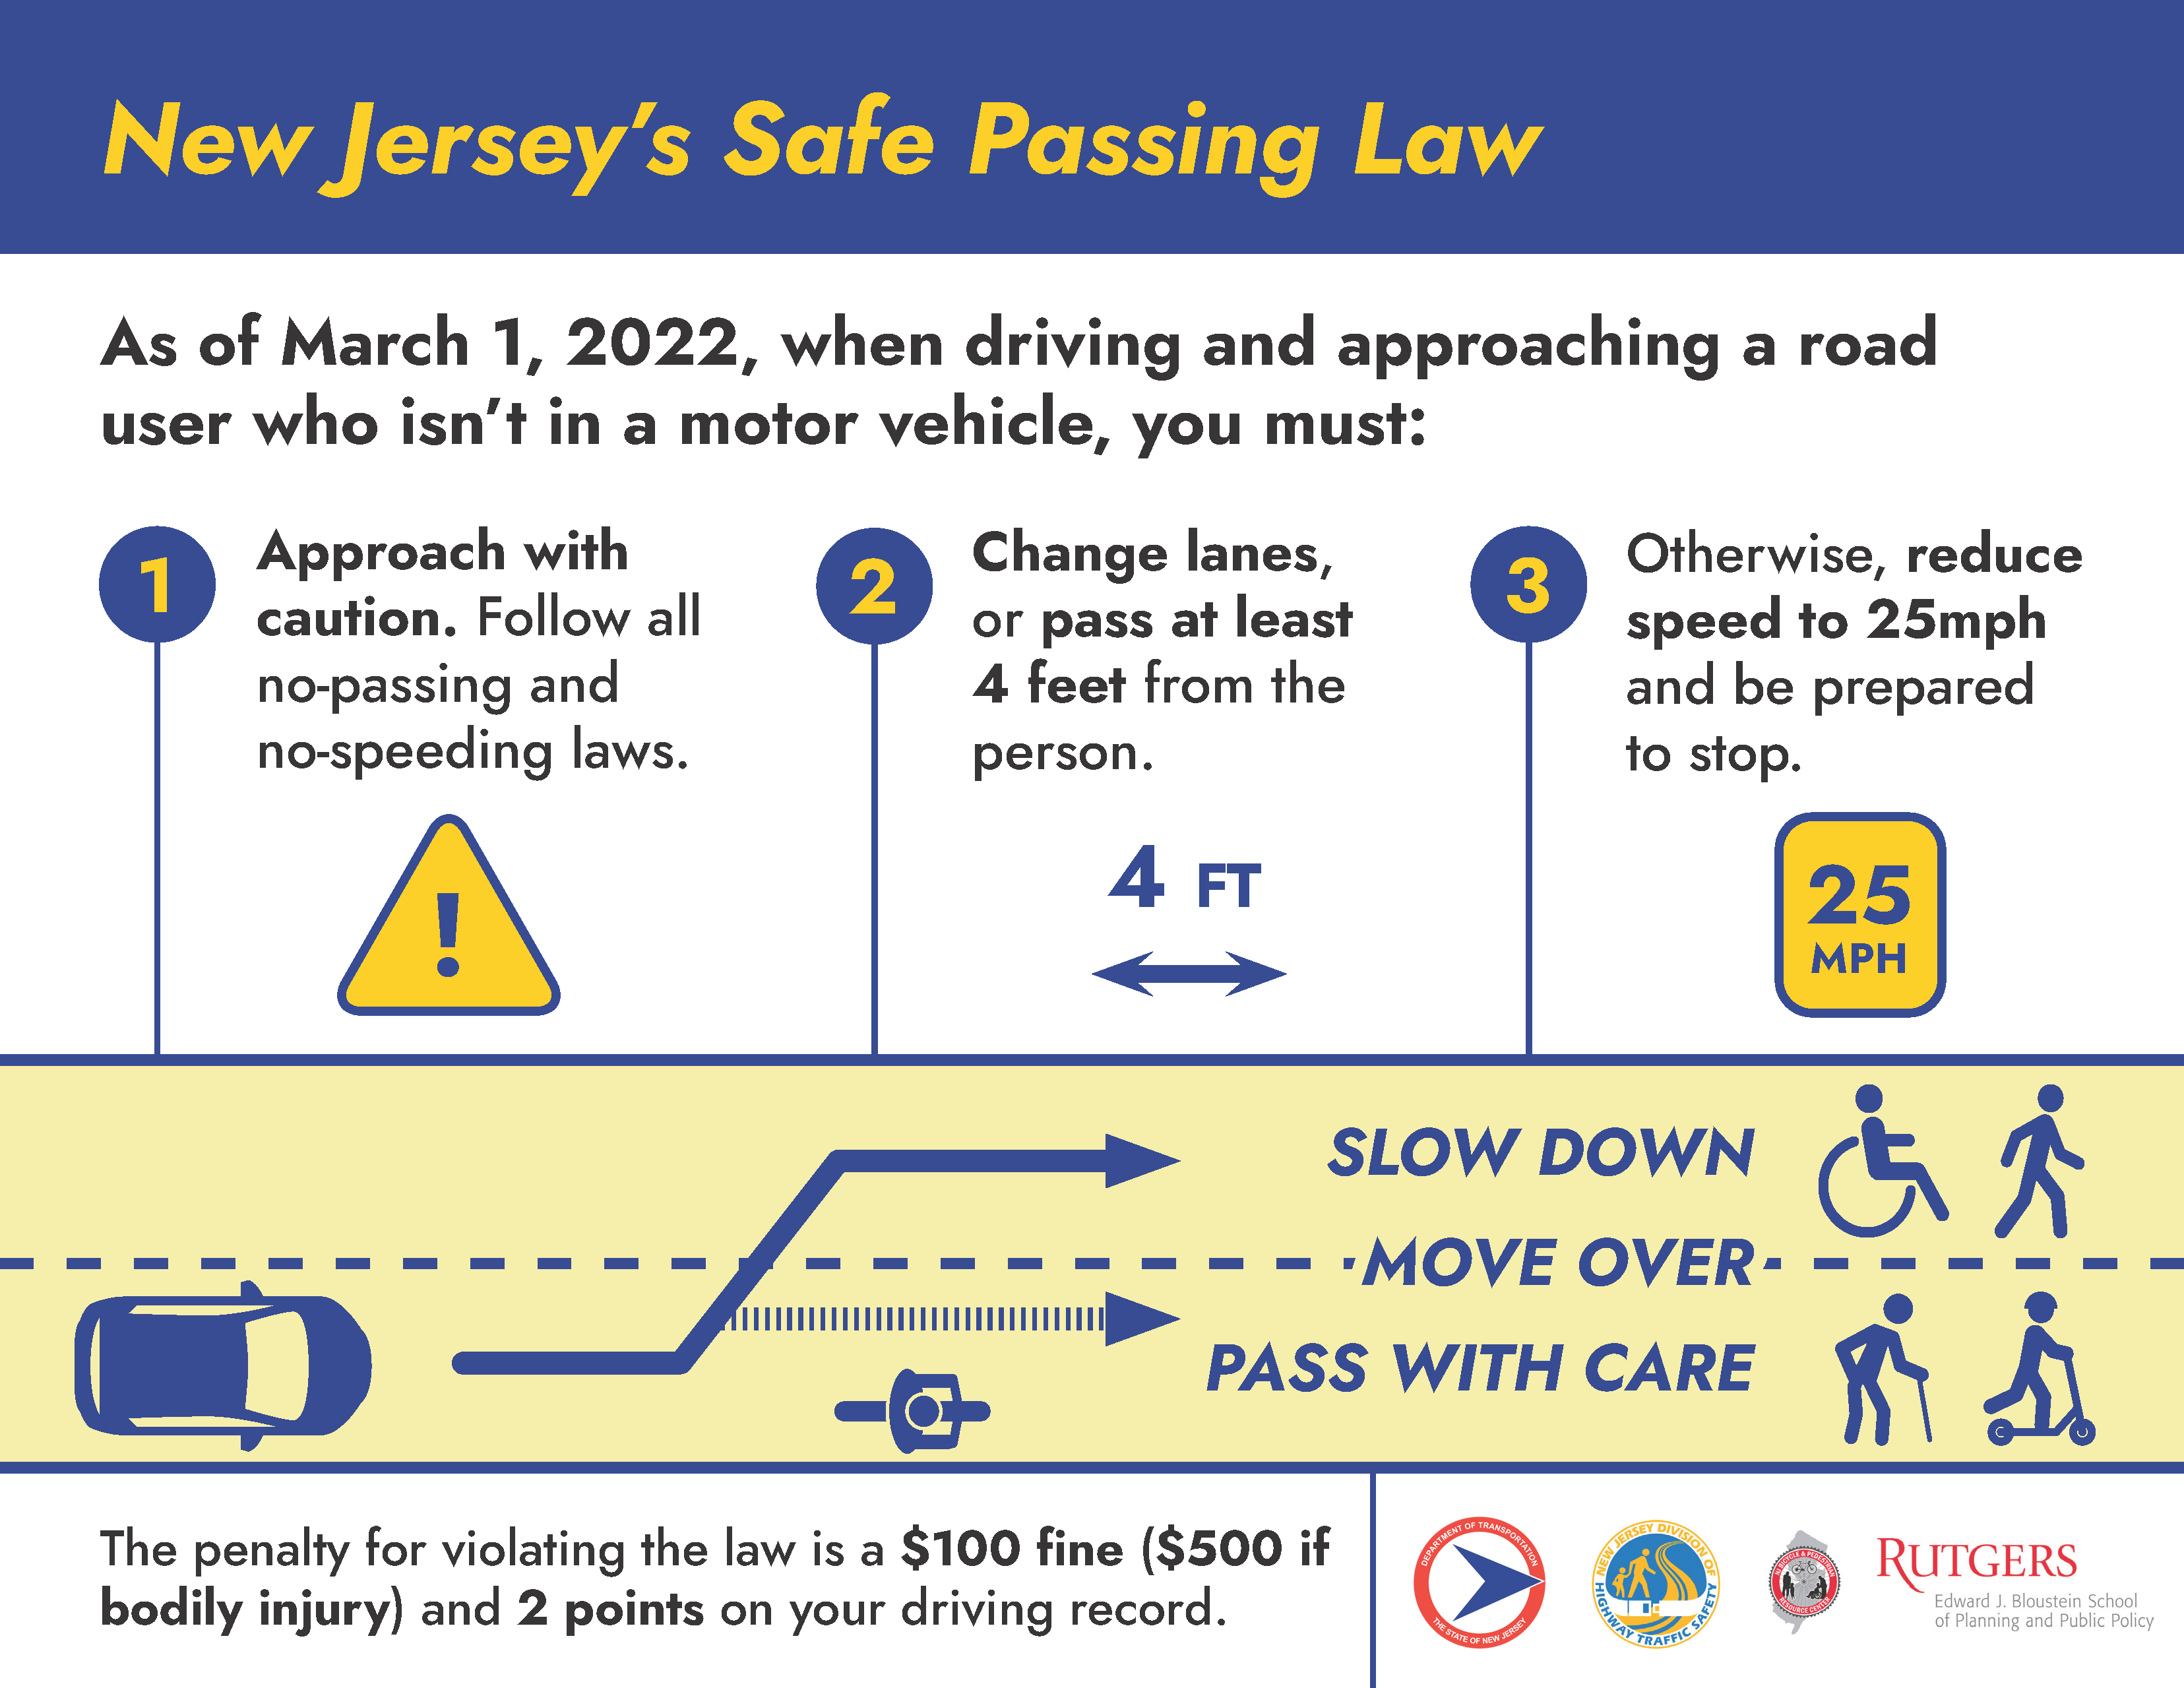 New Jersey's Safe Passing Law The New Jersey Bicycle and Pedestrian